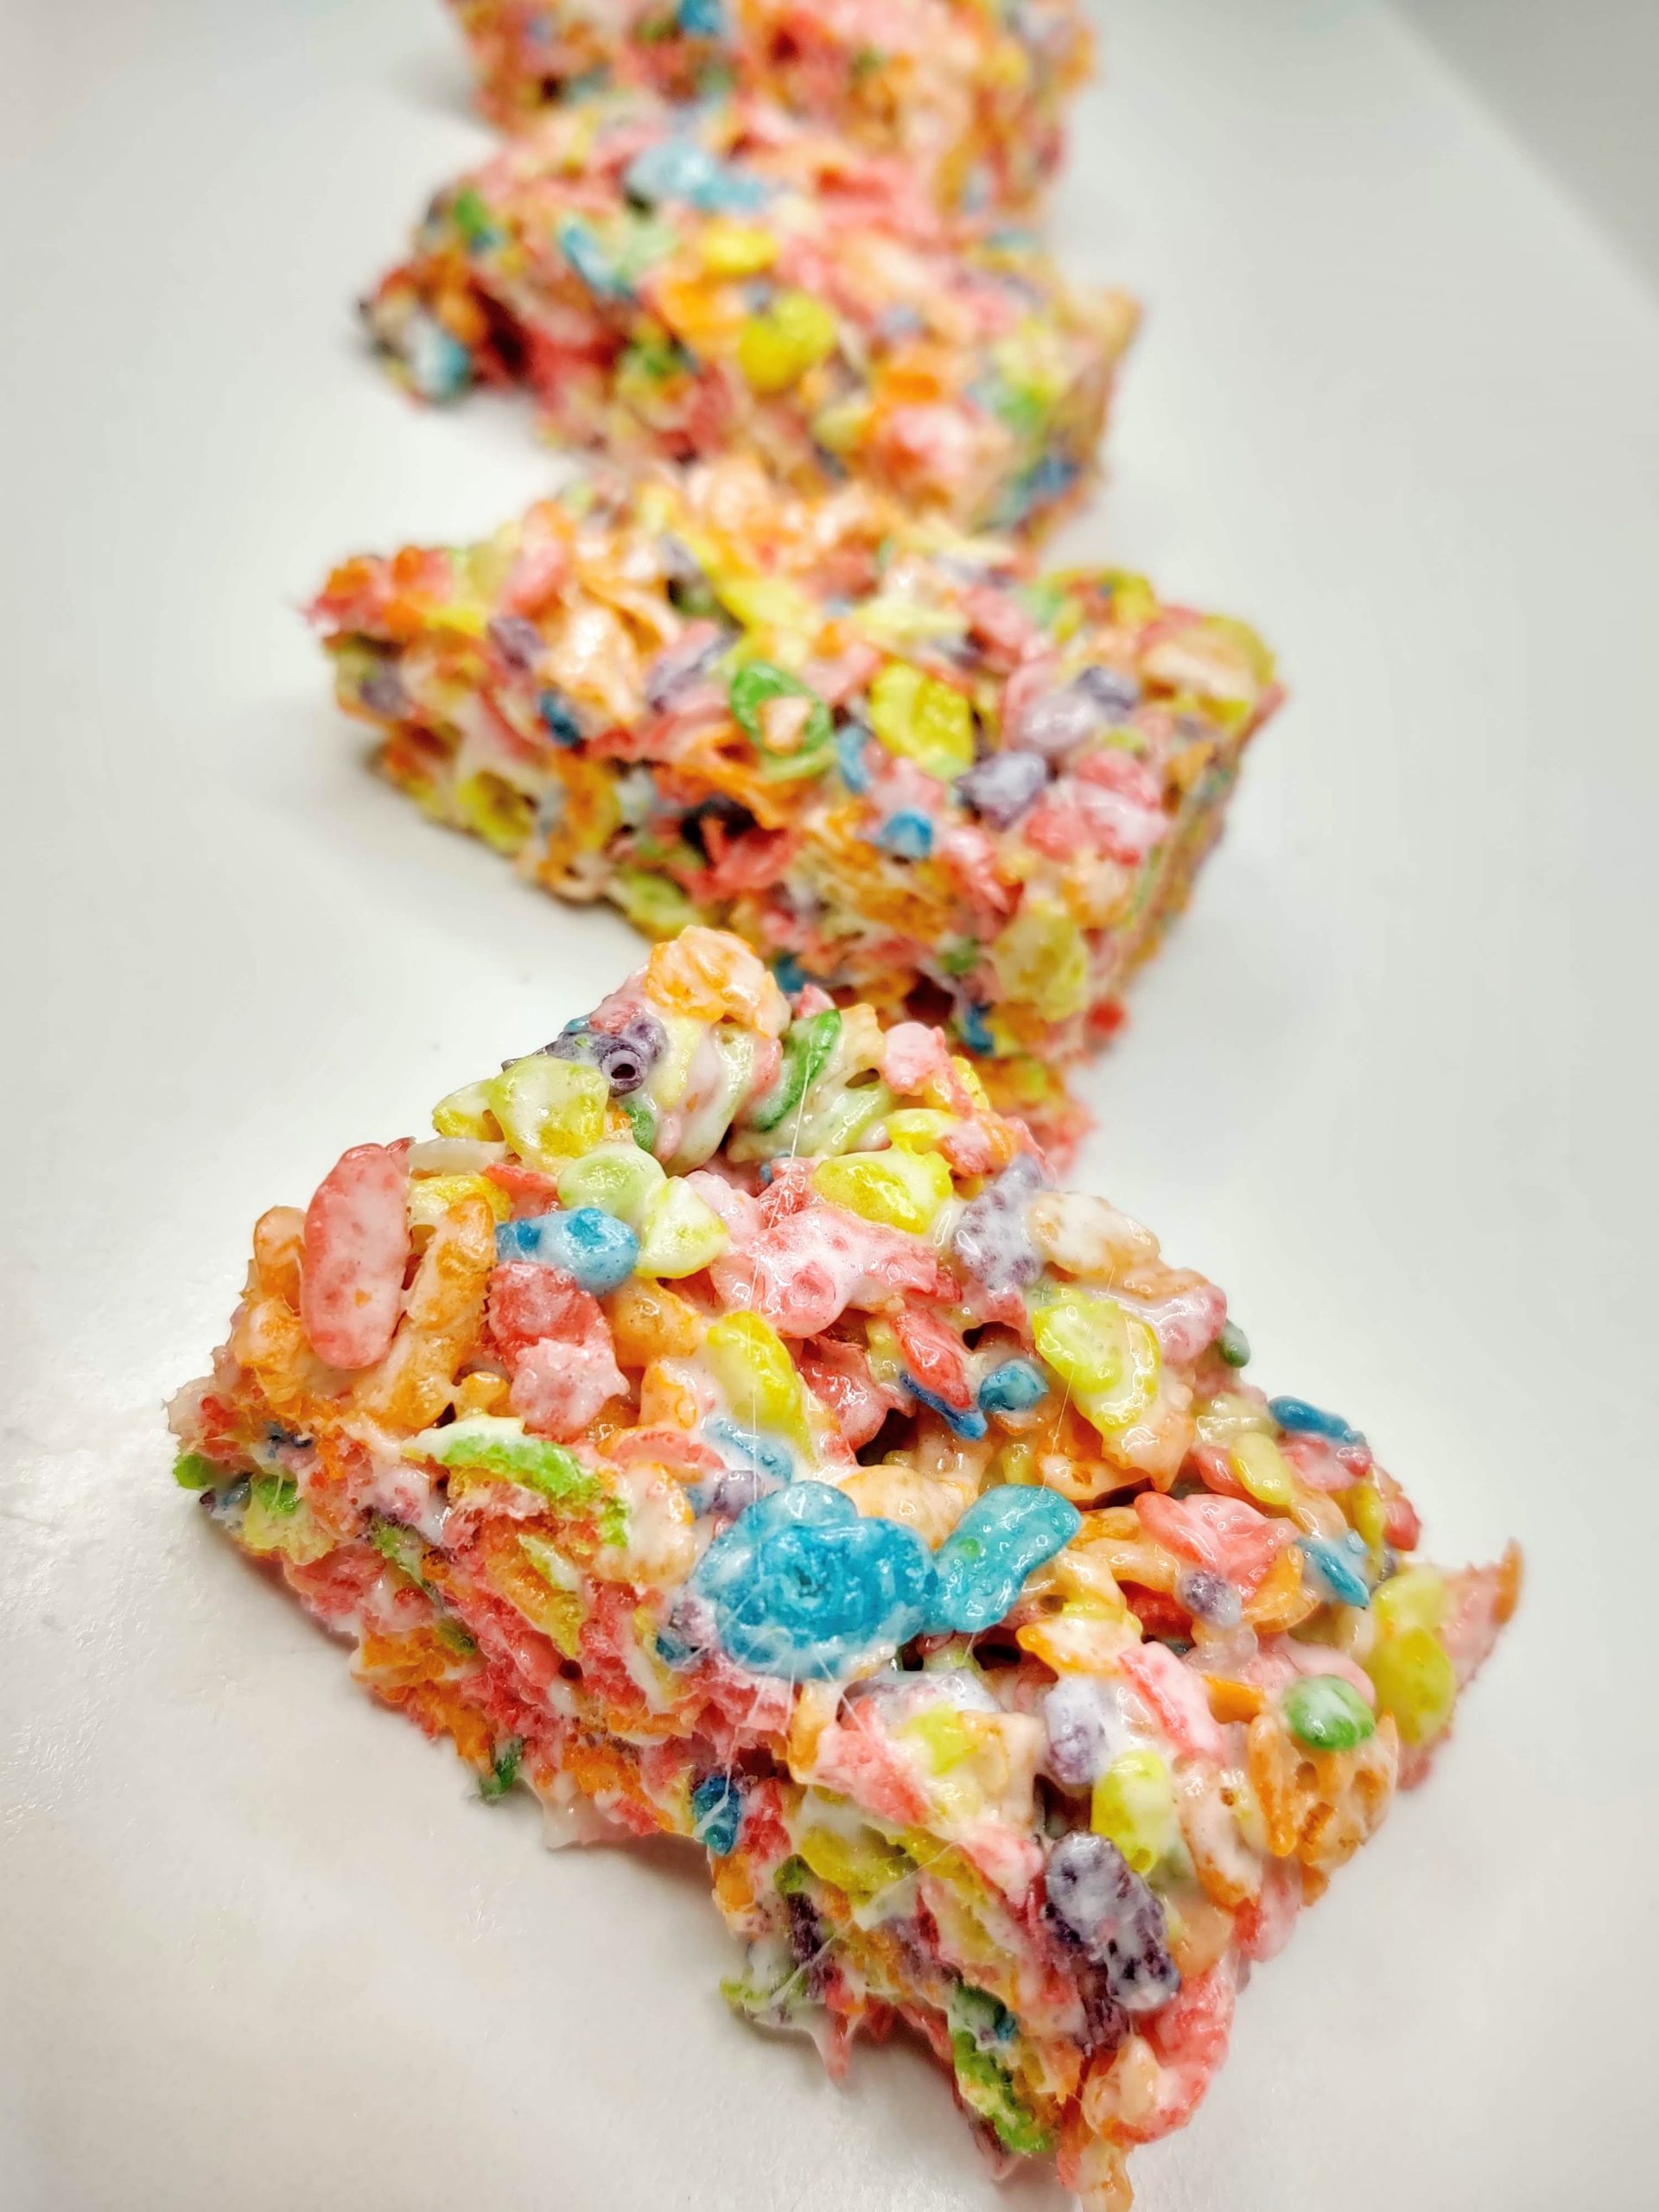 Fruity Pebble Rice Krispie Treats laying on a counter